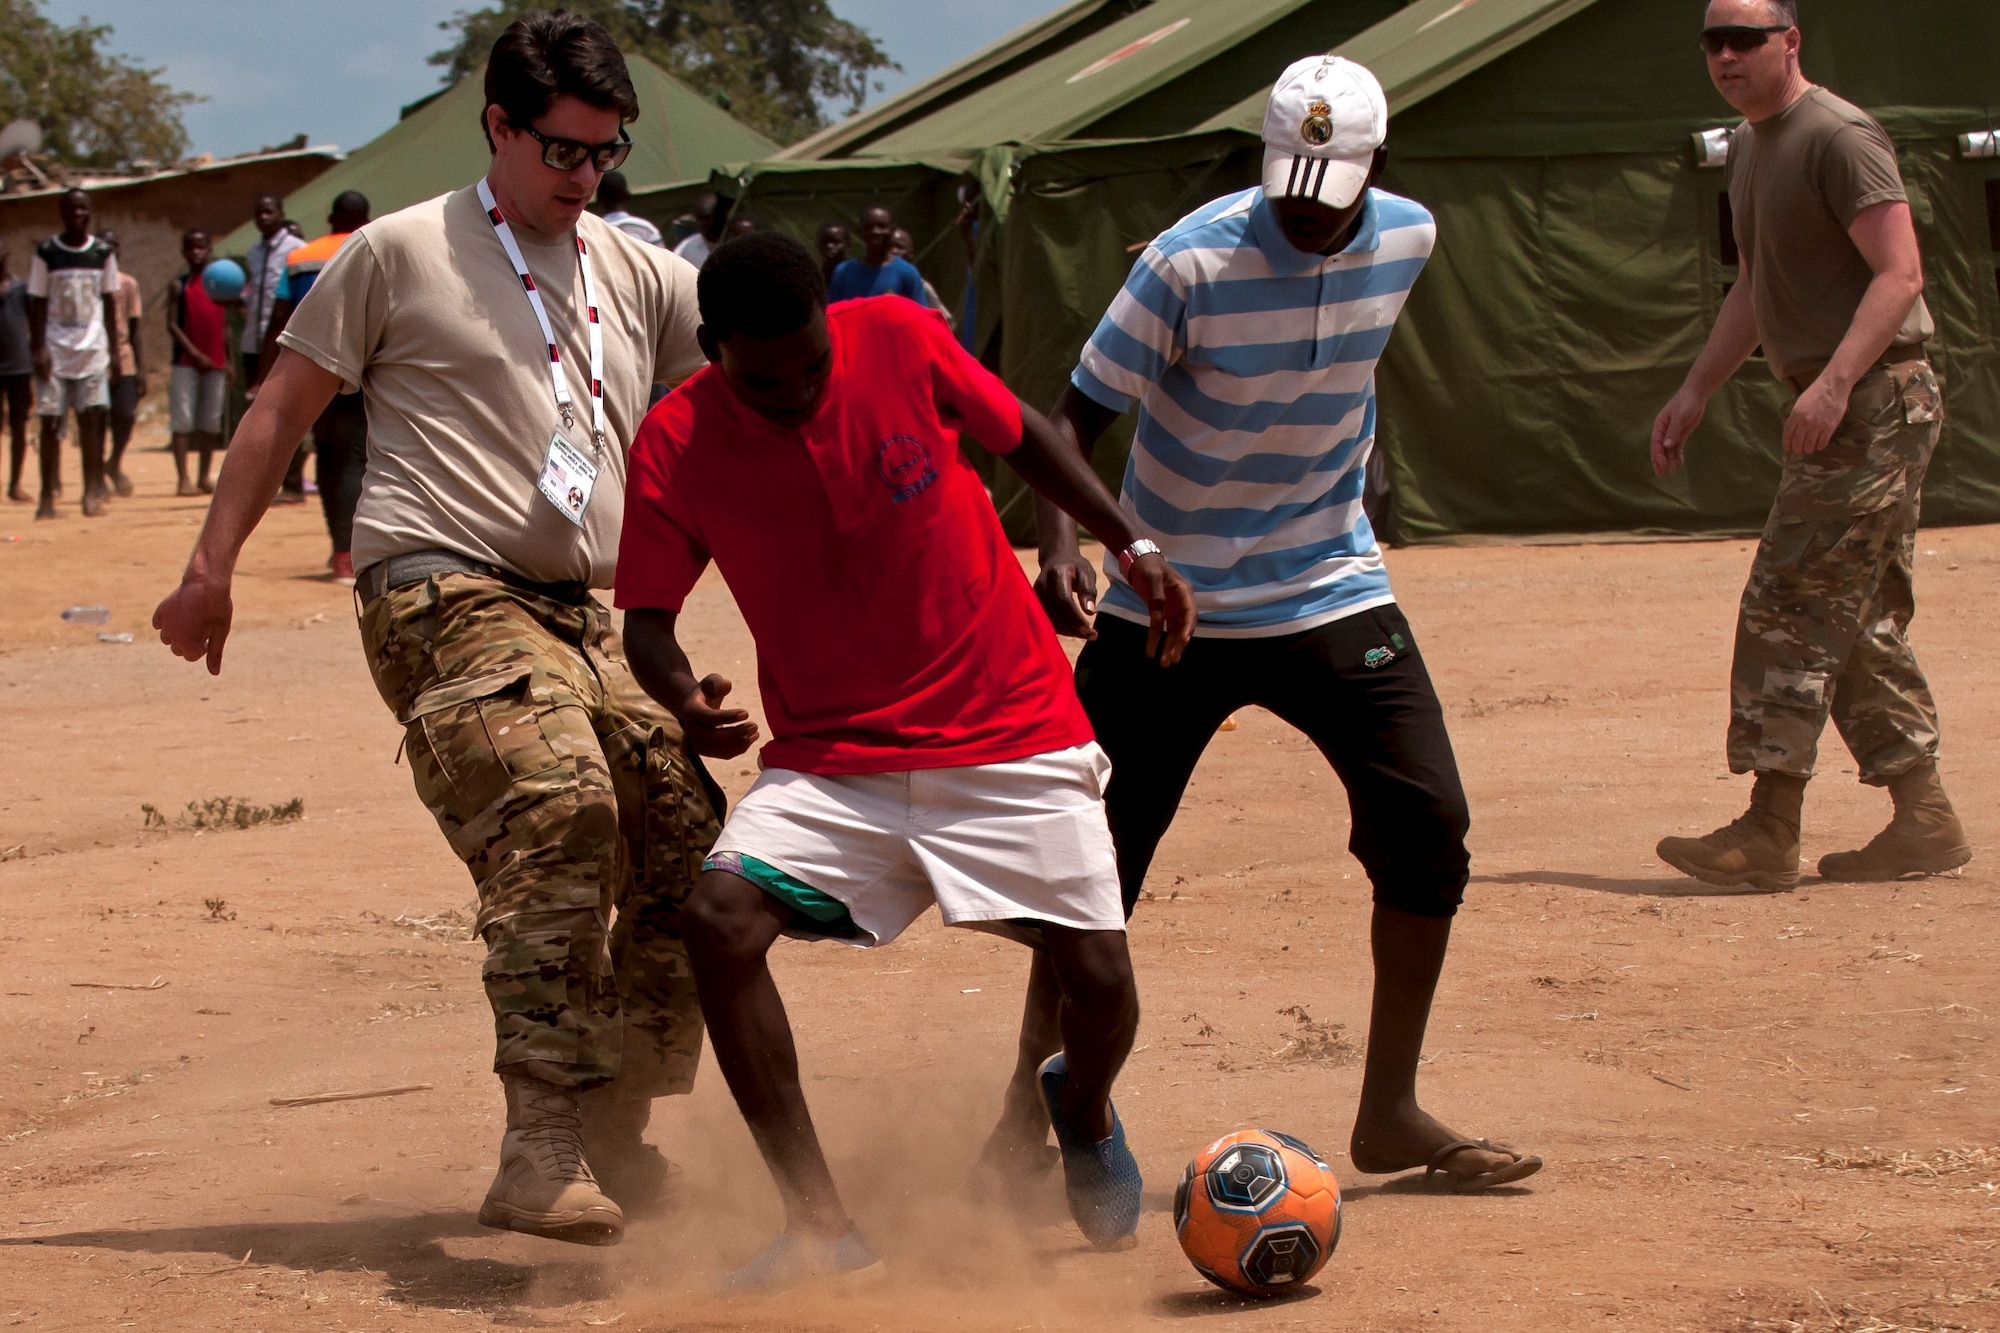 Members of the Ohio National Guard play soccer with children in the village of Vale do Paraiso during the PAMBALA 2017 medical exercise Dec. 12, 2017, in Bengo Province, Angola. The purpose of the engagement for the Ohio National Guard is to give personnel the opportunity to share best practices, strengthen medical treatment processes, establish new relationships with members of the Angolan Armed Forces and to nurture their existing 11-year partnership with Serbia, through the National Guard State Partnership Program. (Ohio National Guard photo by Staff Sgt. Wendy Kuhn)